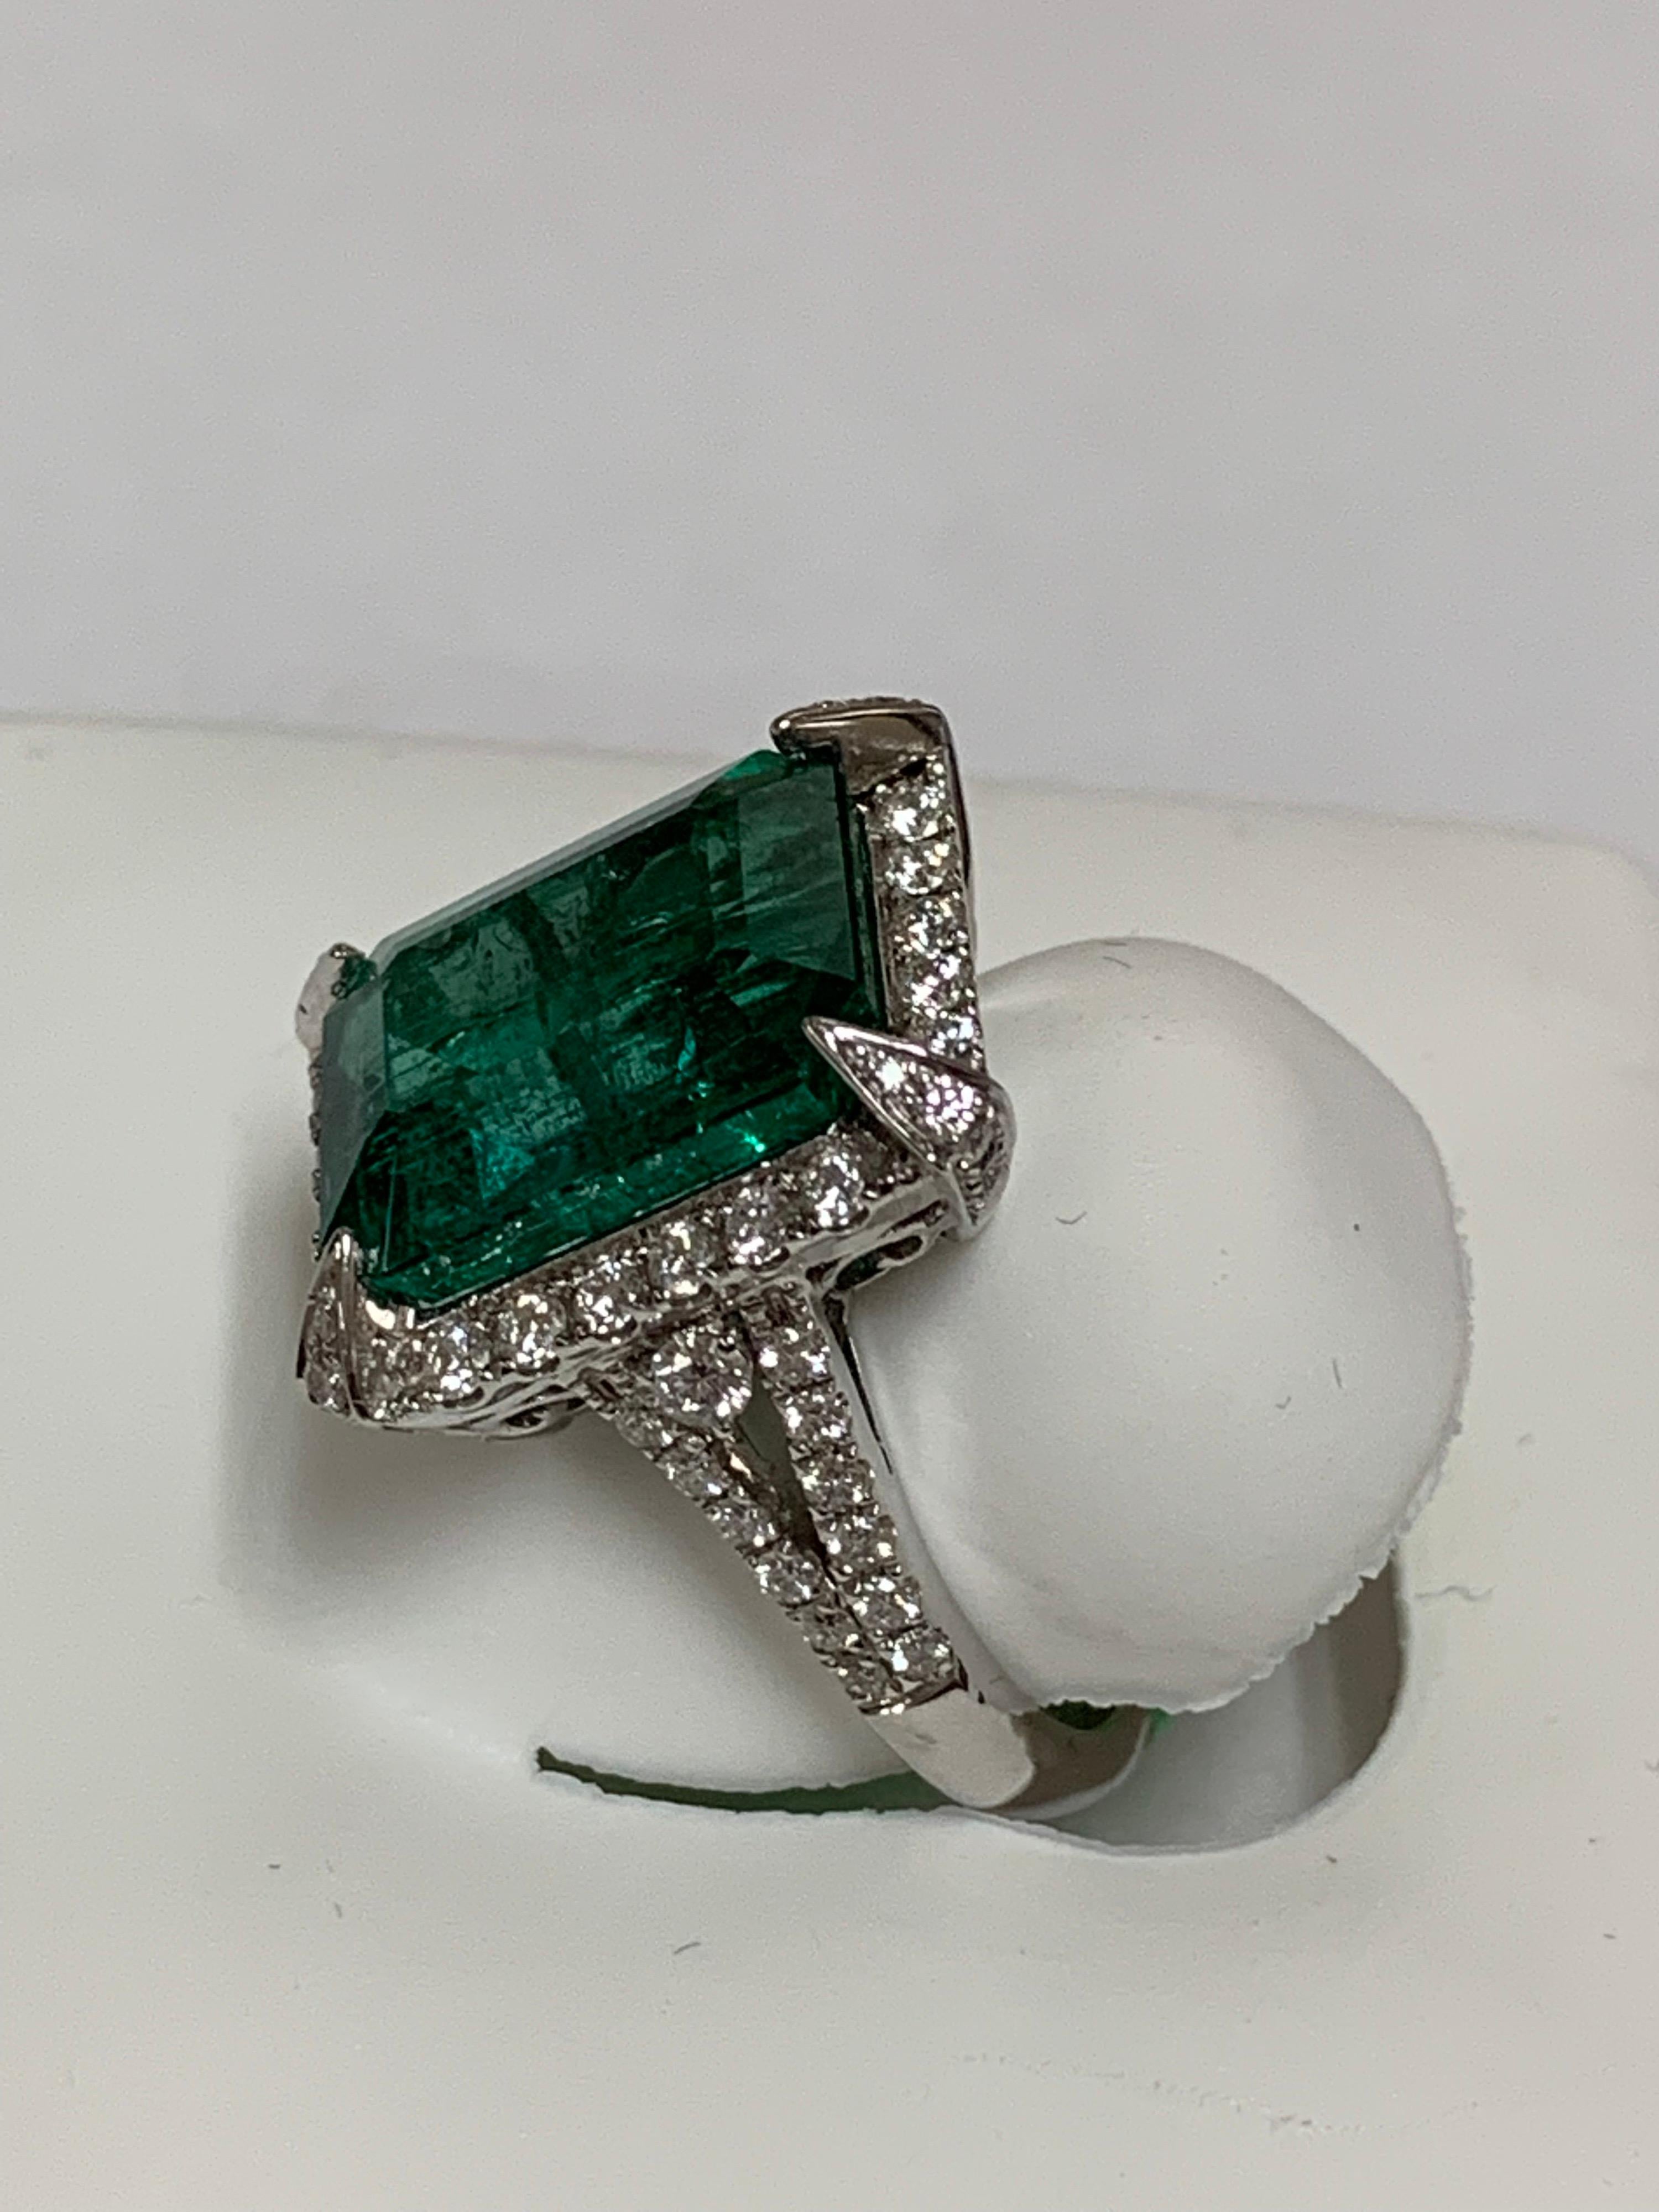 Natural emerald cut emerald 8.63 Carat and white round diamonds 1 carat set in 18 karat white gold is one of a kind handcrafted ring. The ring is size 7 and can be resized if needed.